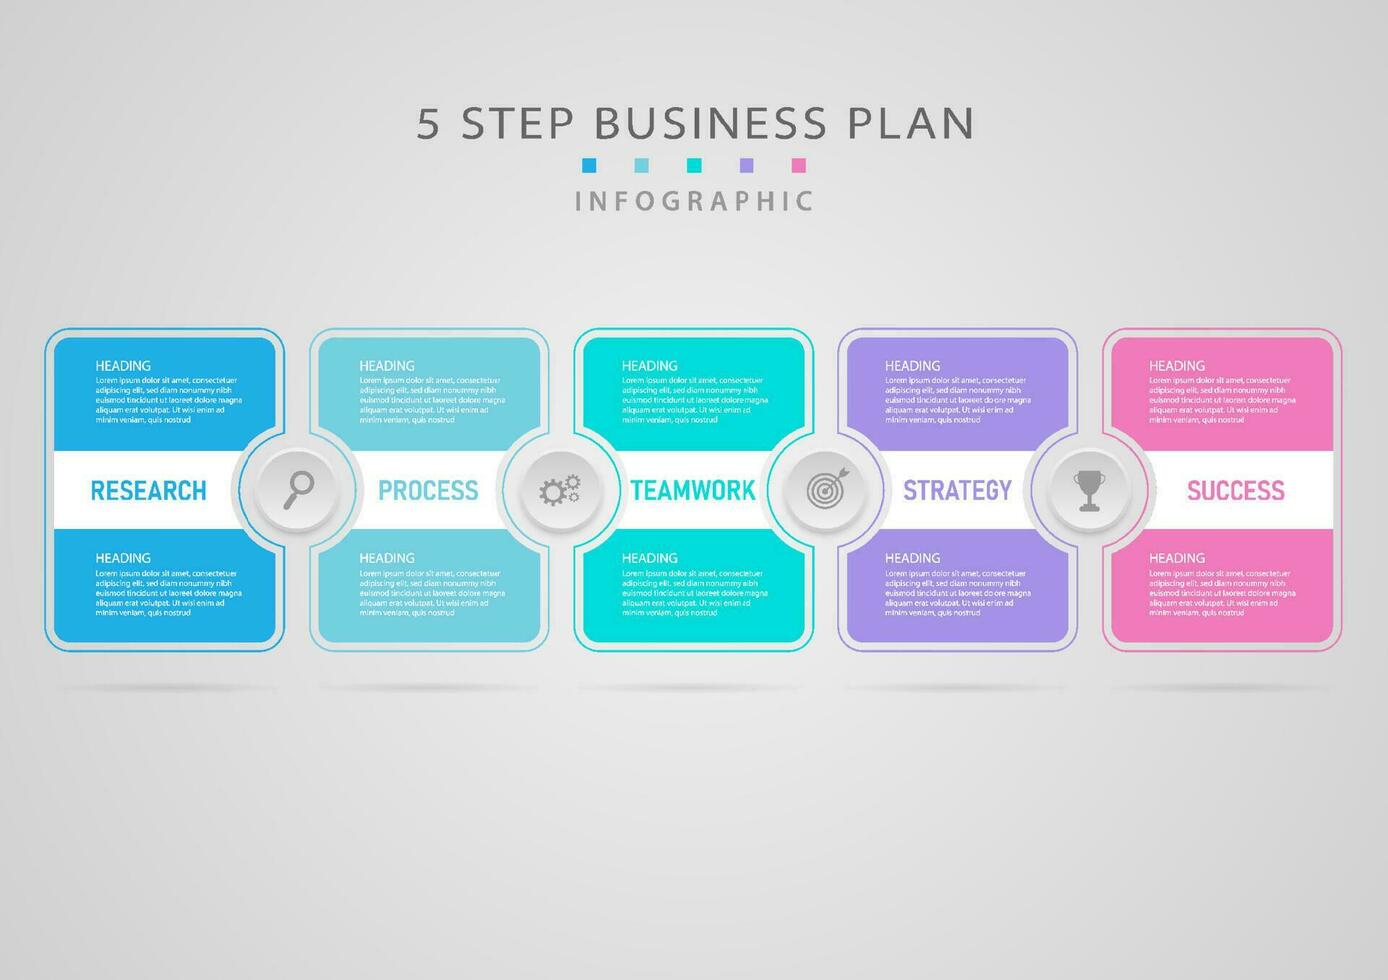 modern infographic 5 steps business plan success square and circle platel Multi color icons in center gray gradient background. Design for marketing, investment, finance, planning, product. vector